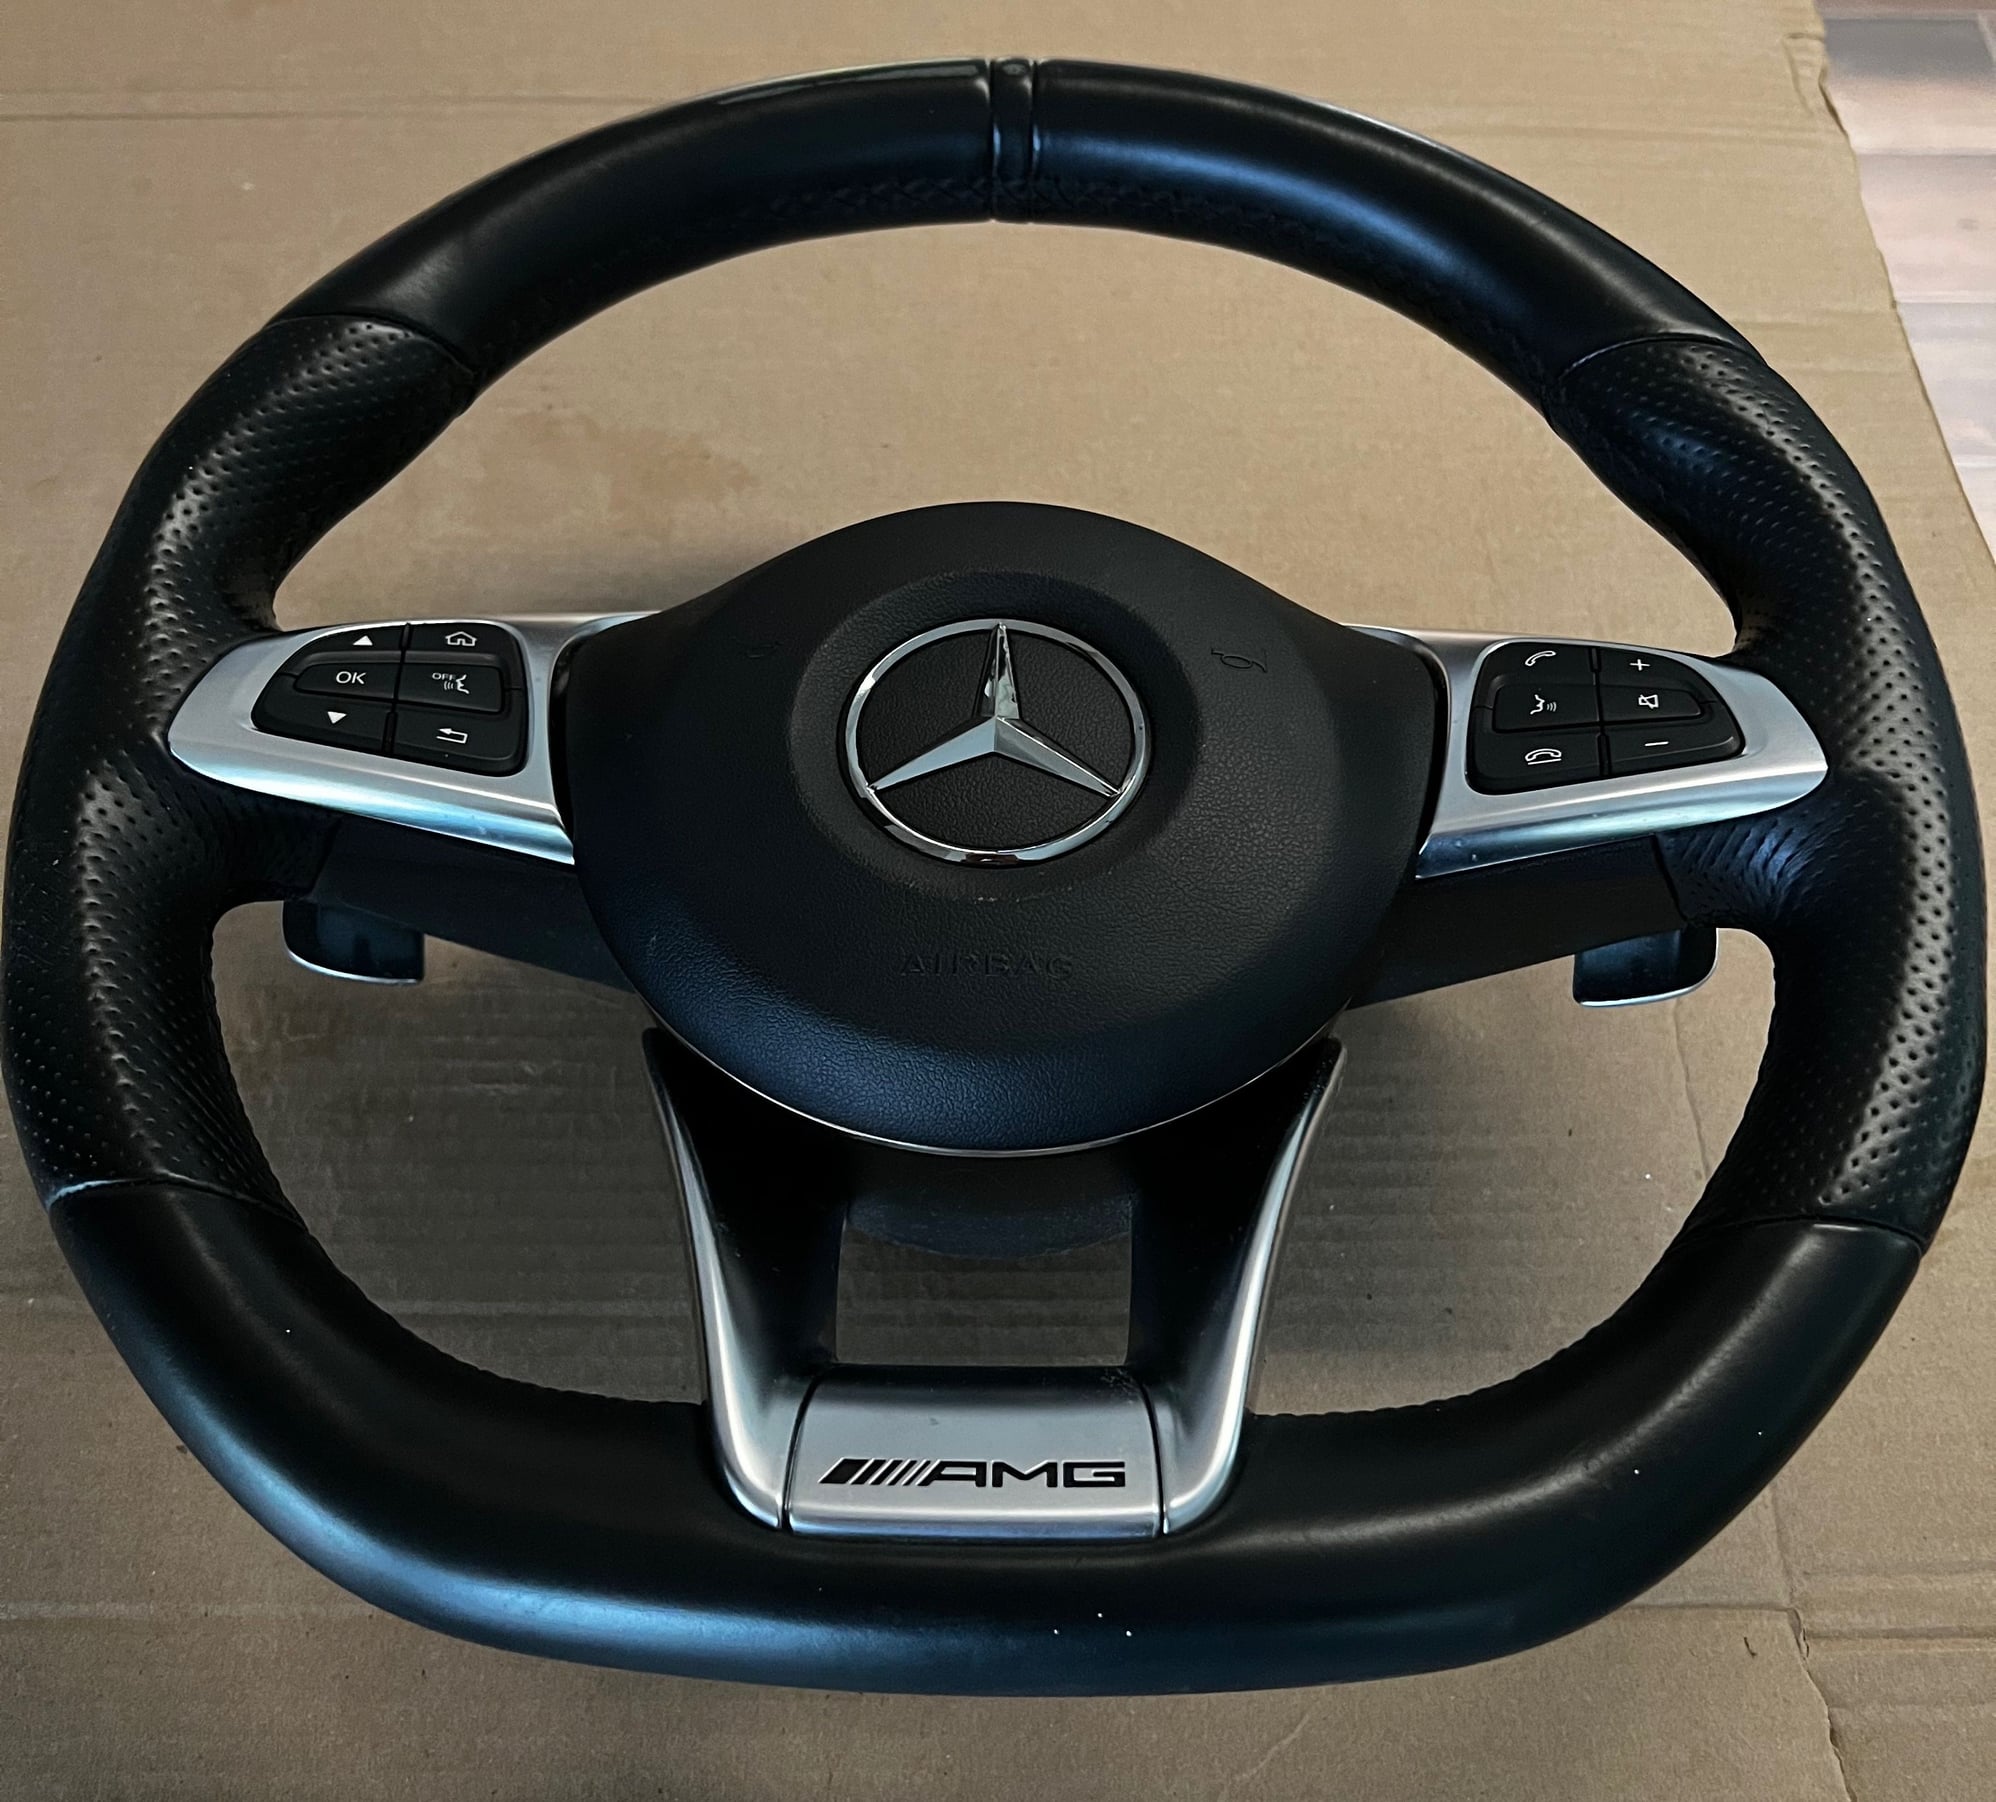 Steering/Suspension - 2017 AMG GT OEM Steering Wheel for sale - Used - 2016 to 2018 Mercedes-Benz AMG GT - Pompano Beach, FL 33069, United States